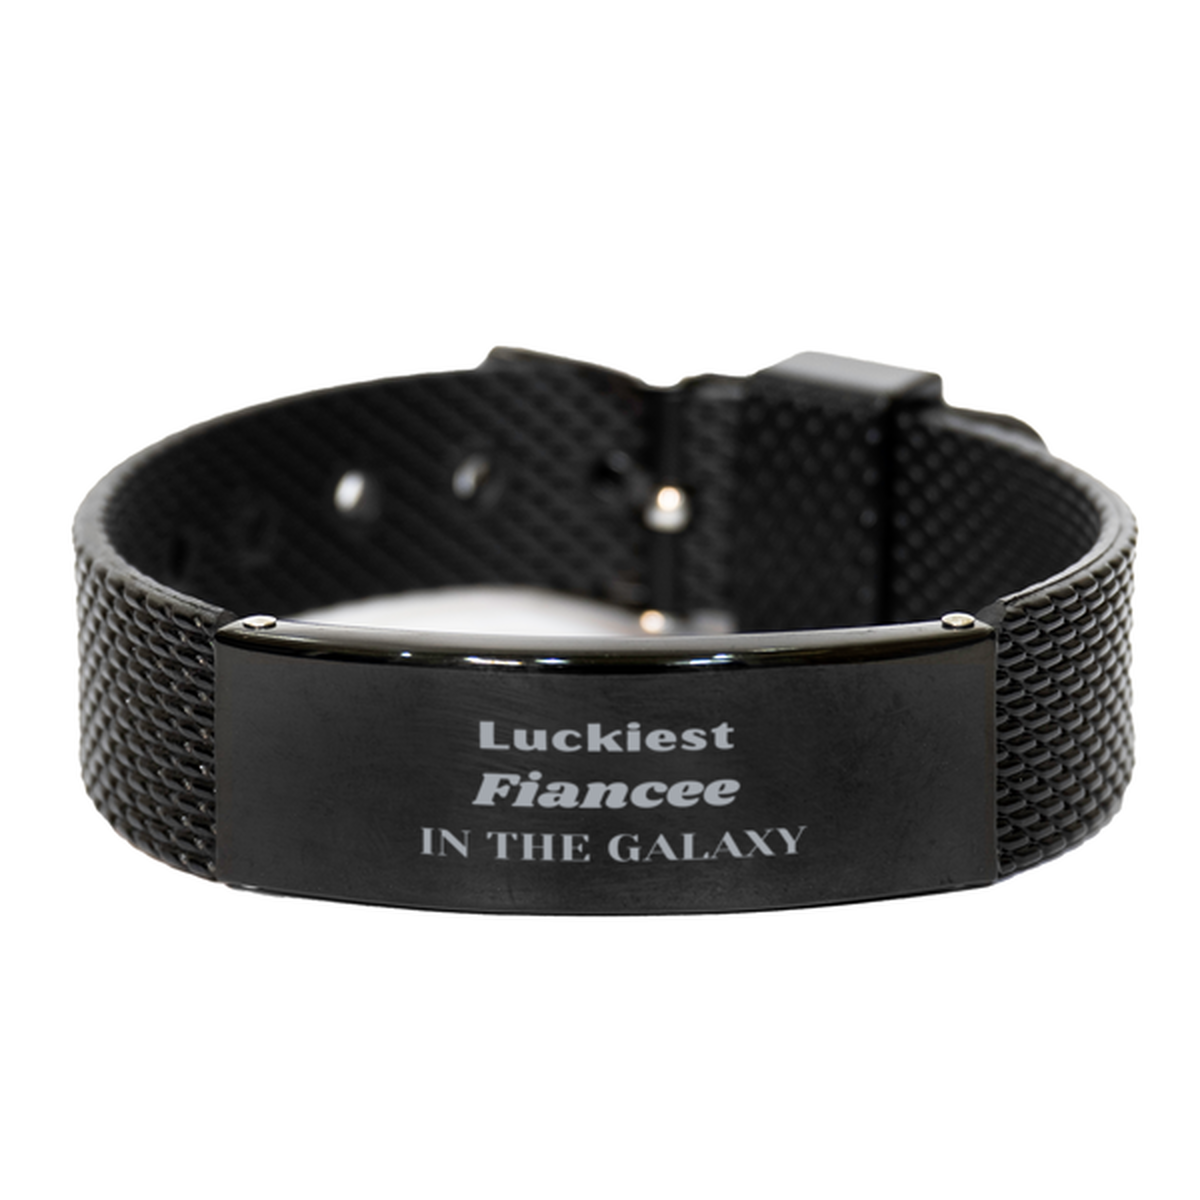 Luckiest Fiancee in the Galaxy, To My Fiancee Engraved Gifts, Christmas Fiancee Black Shark Mesh Bracelet Gifts, X-mas Birthday Unique Gifts For Fiancee Men Women